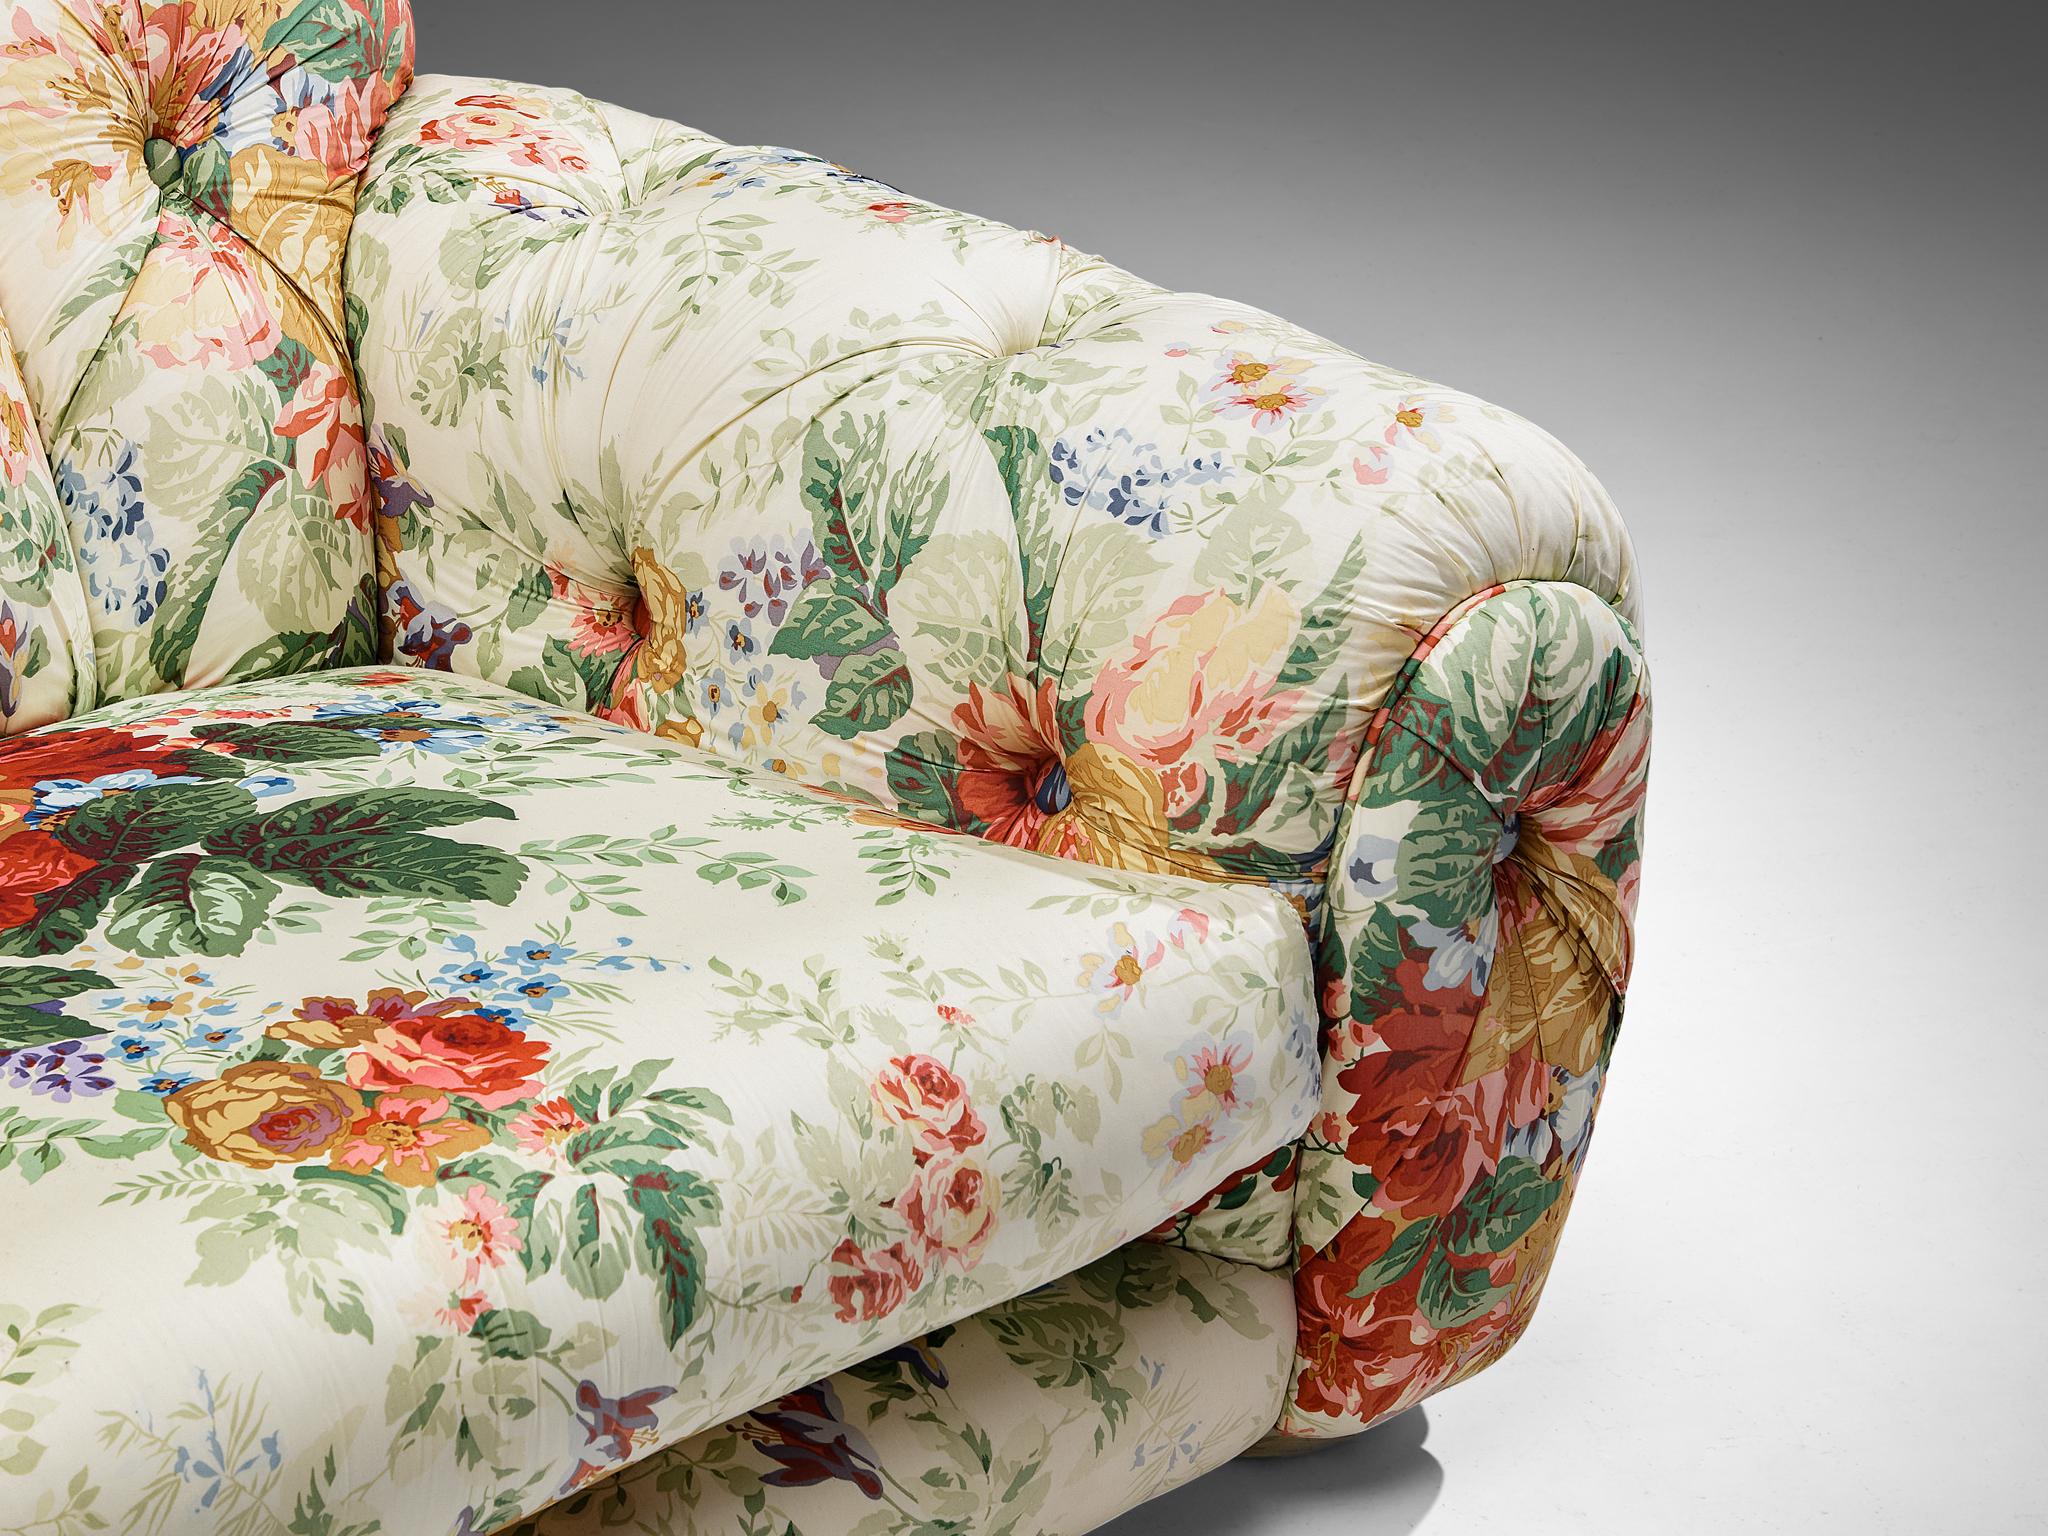 Fabric Vivai Del Sud 'Superstar' Lounge Chair in Floral Upholstery